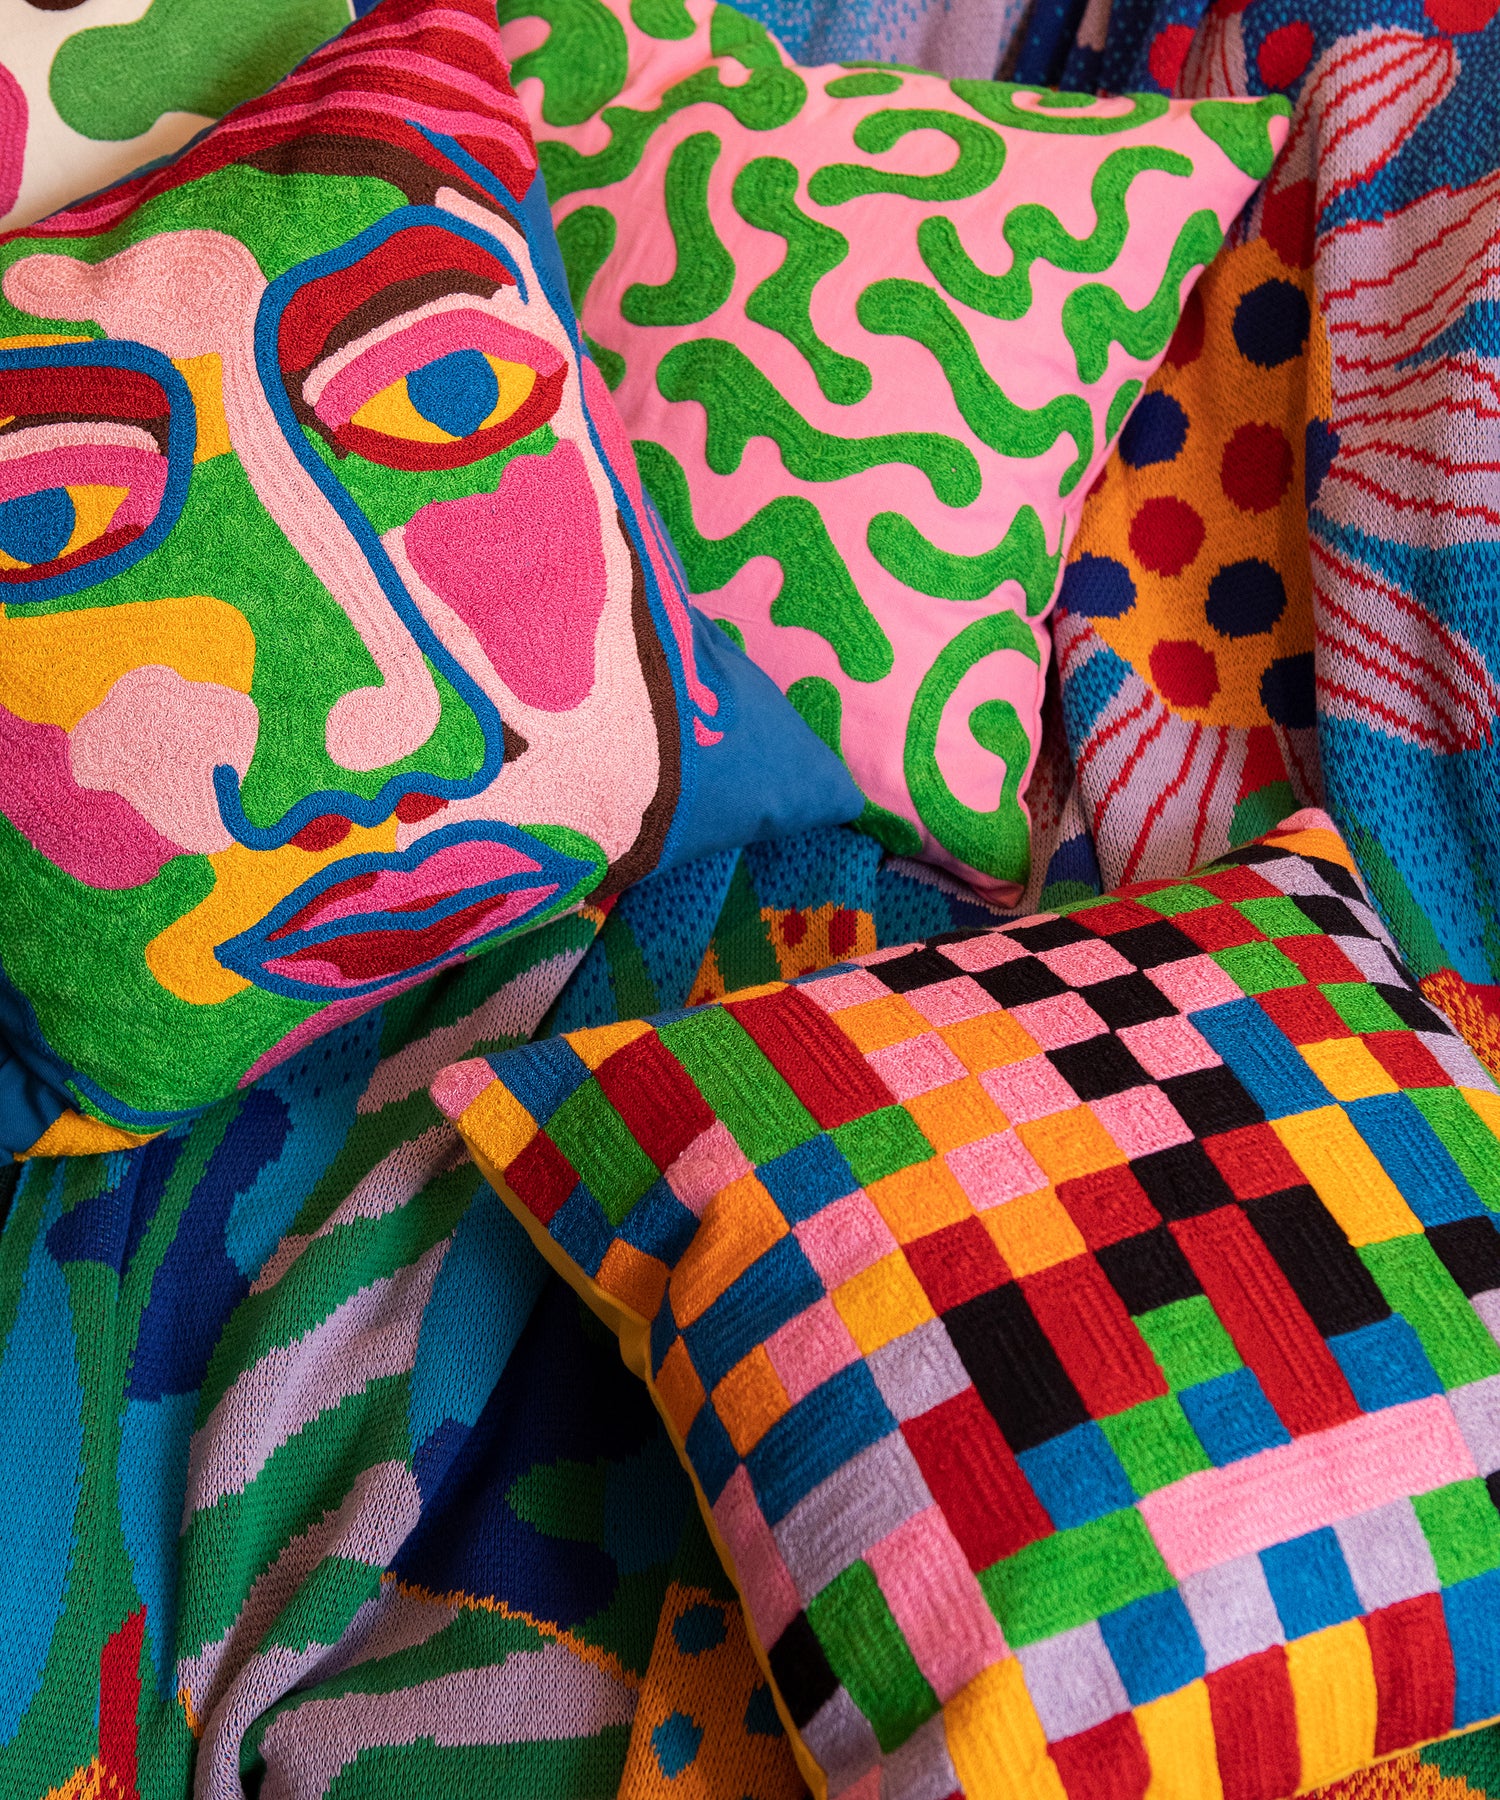 Detail of Pixels Pillow laying on top of the Best Buds Blanket next to the Portrait and Silly Squiggles Pillows.